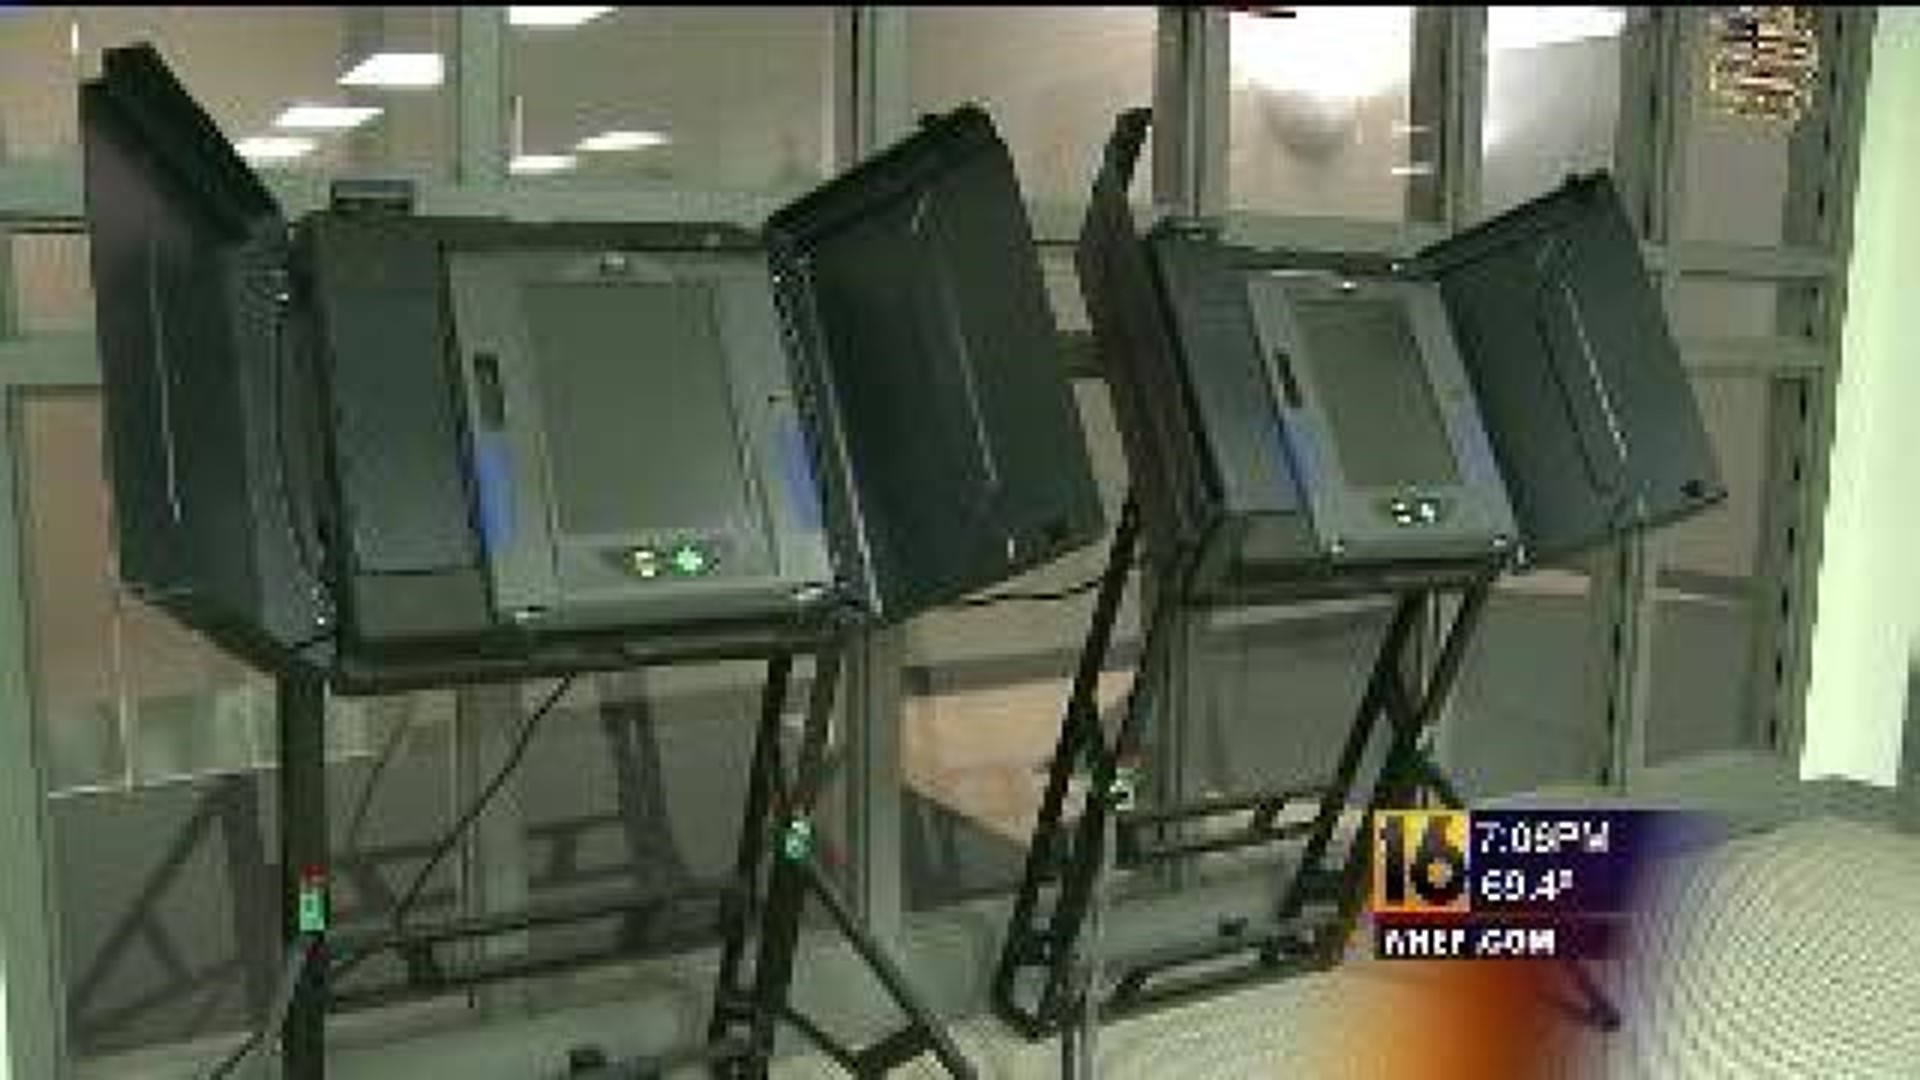 Wyoming Co. Elections Office Lends Help to Luzerne County